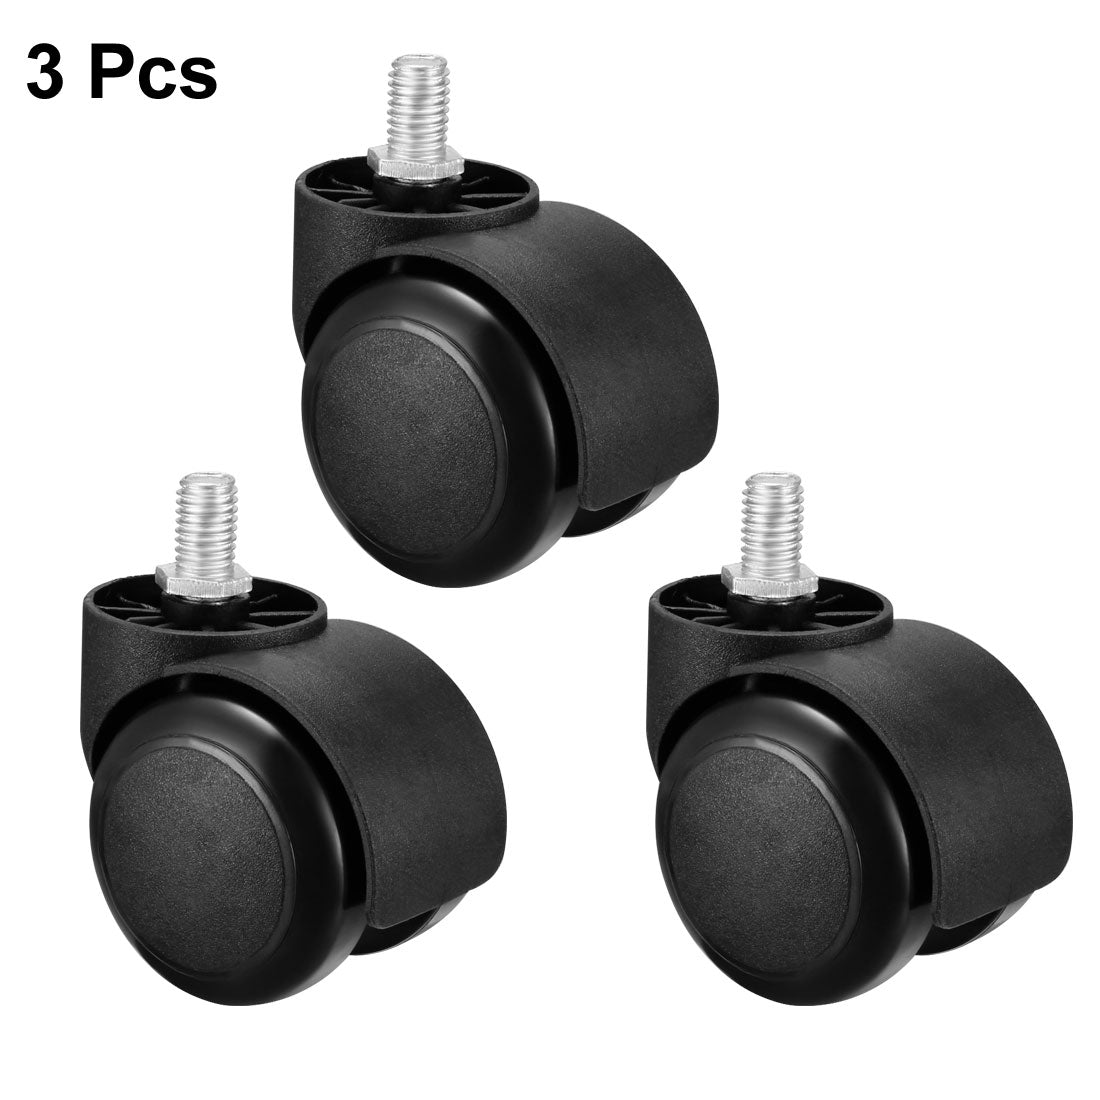 uxcell Uxcell Office Chair Casters Wheels 2 Inch PU Twin Wheel M10x14mm Threaded Stem Swivel Caster Black, 3 Pcs